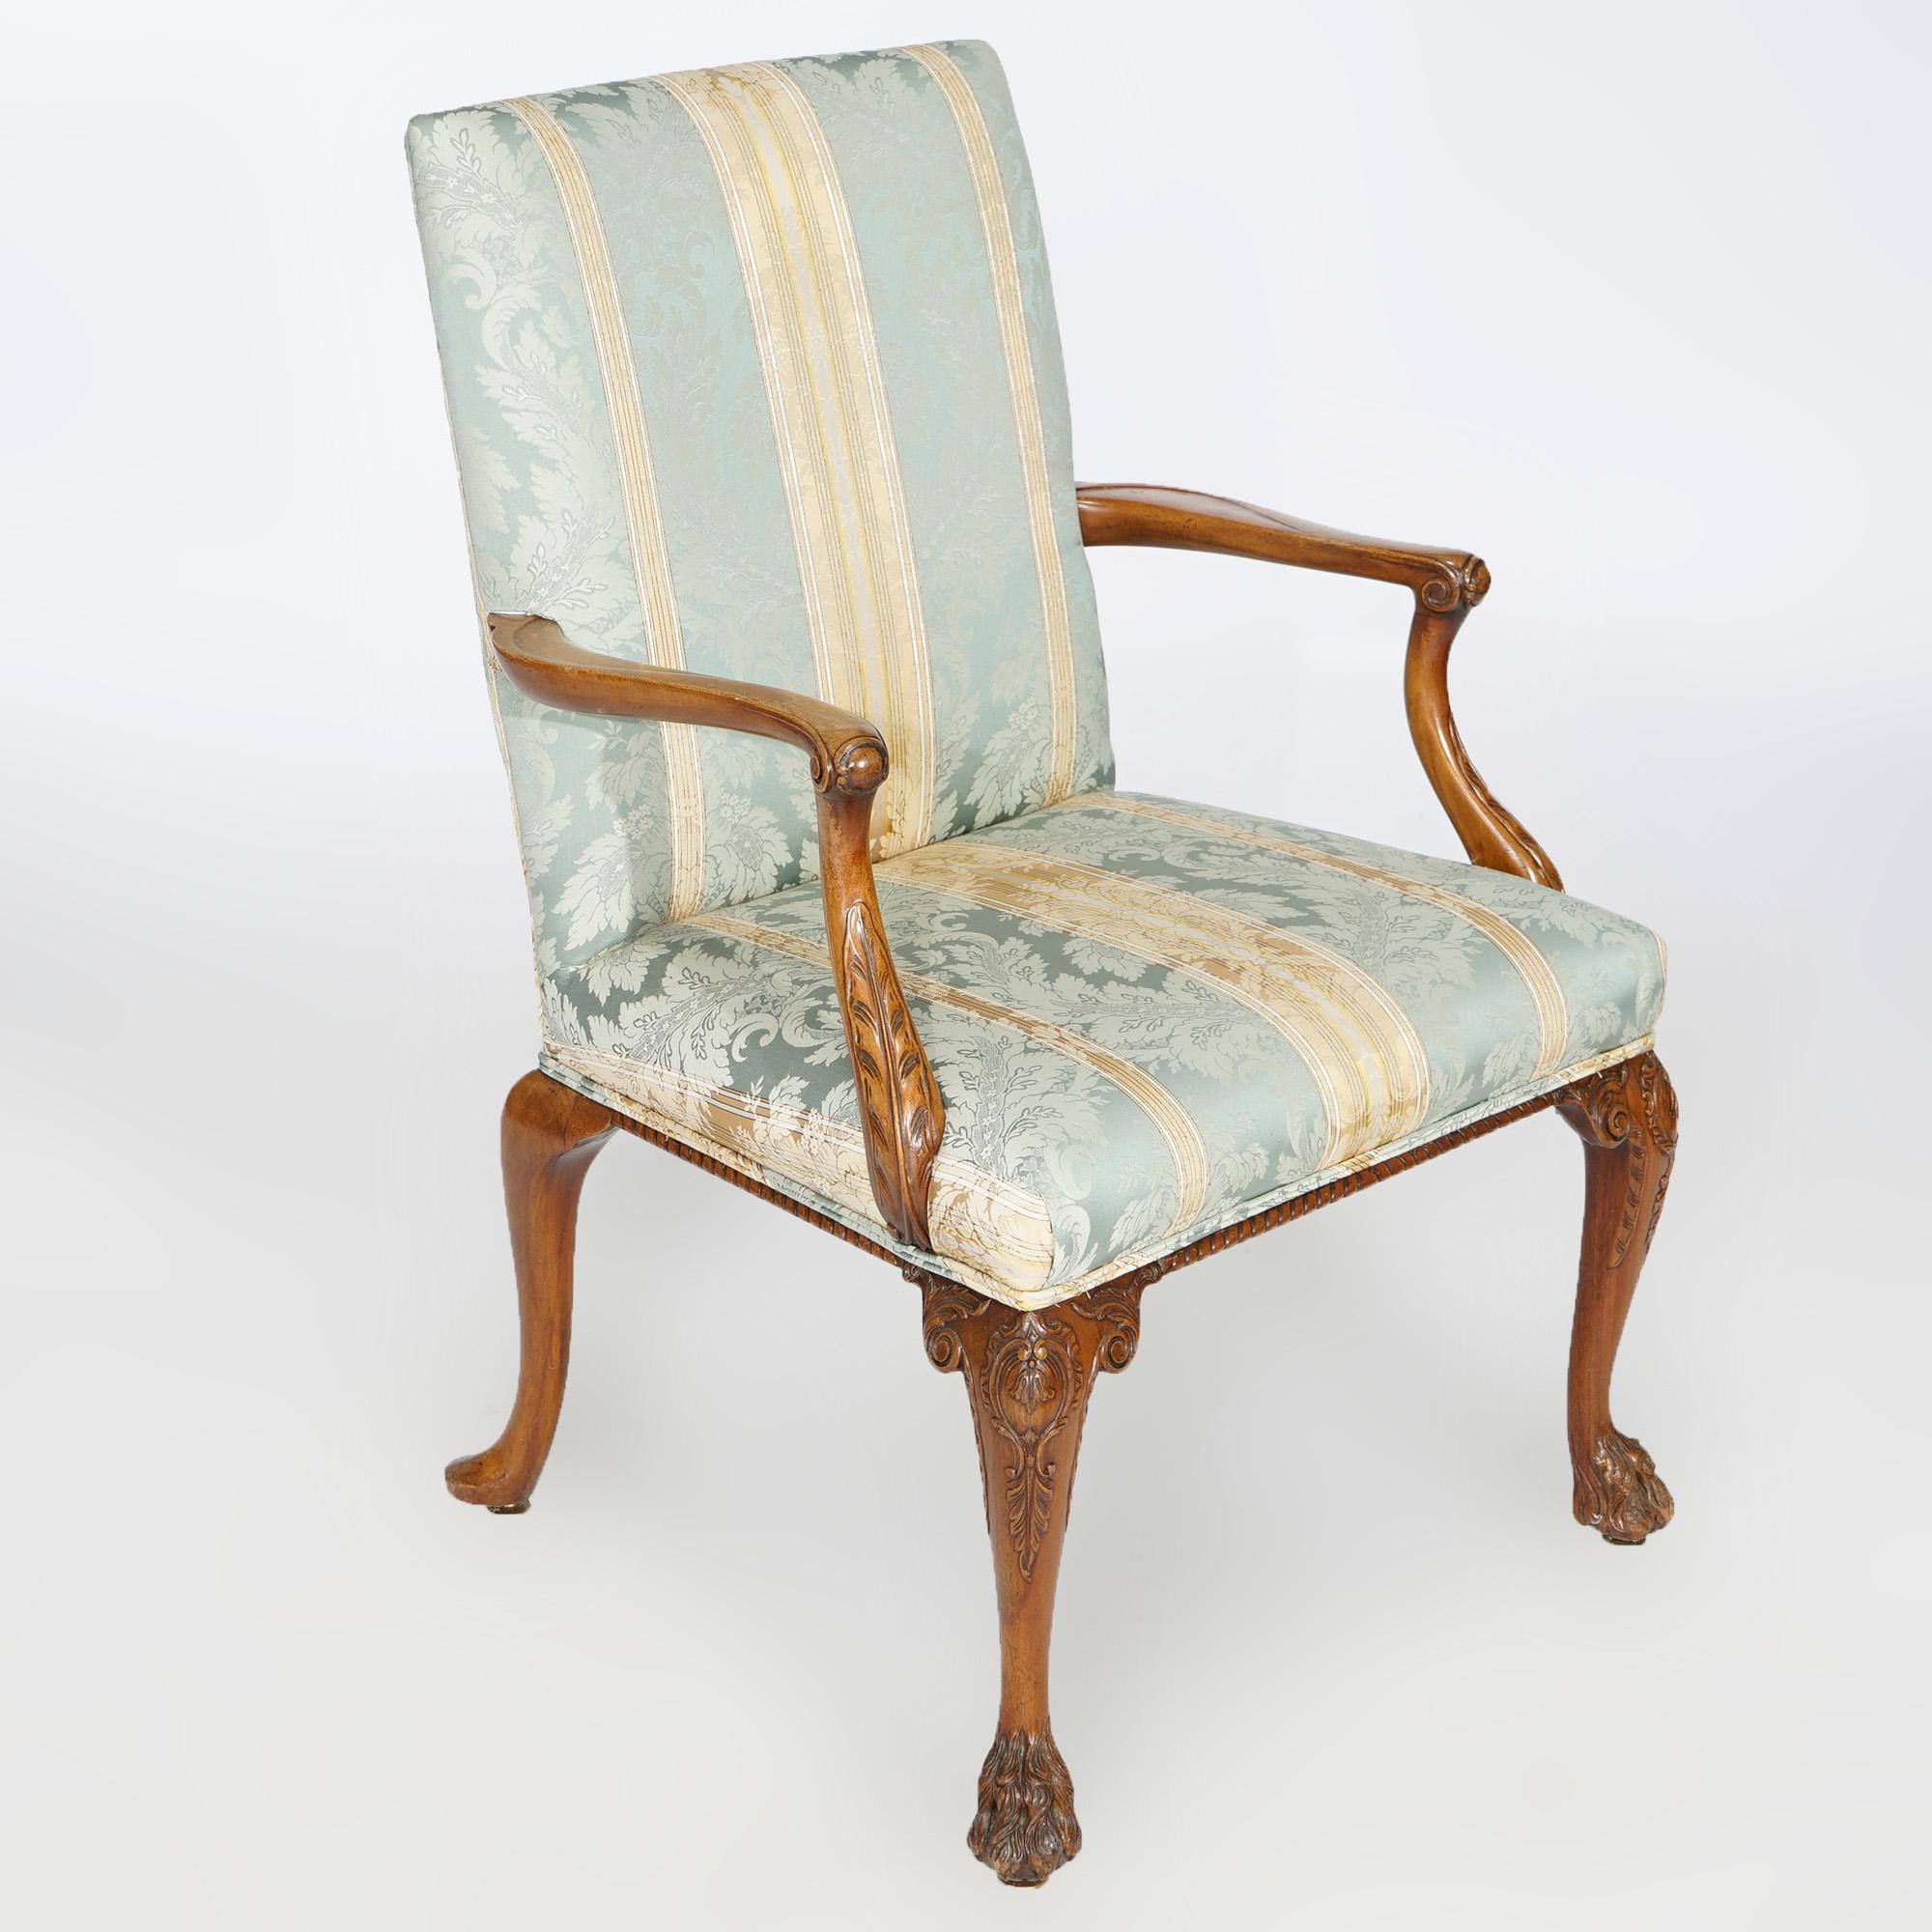 19th Century Antique English Walnut Upholstered Lolling Chair 19th C